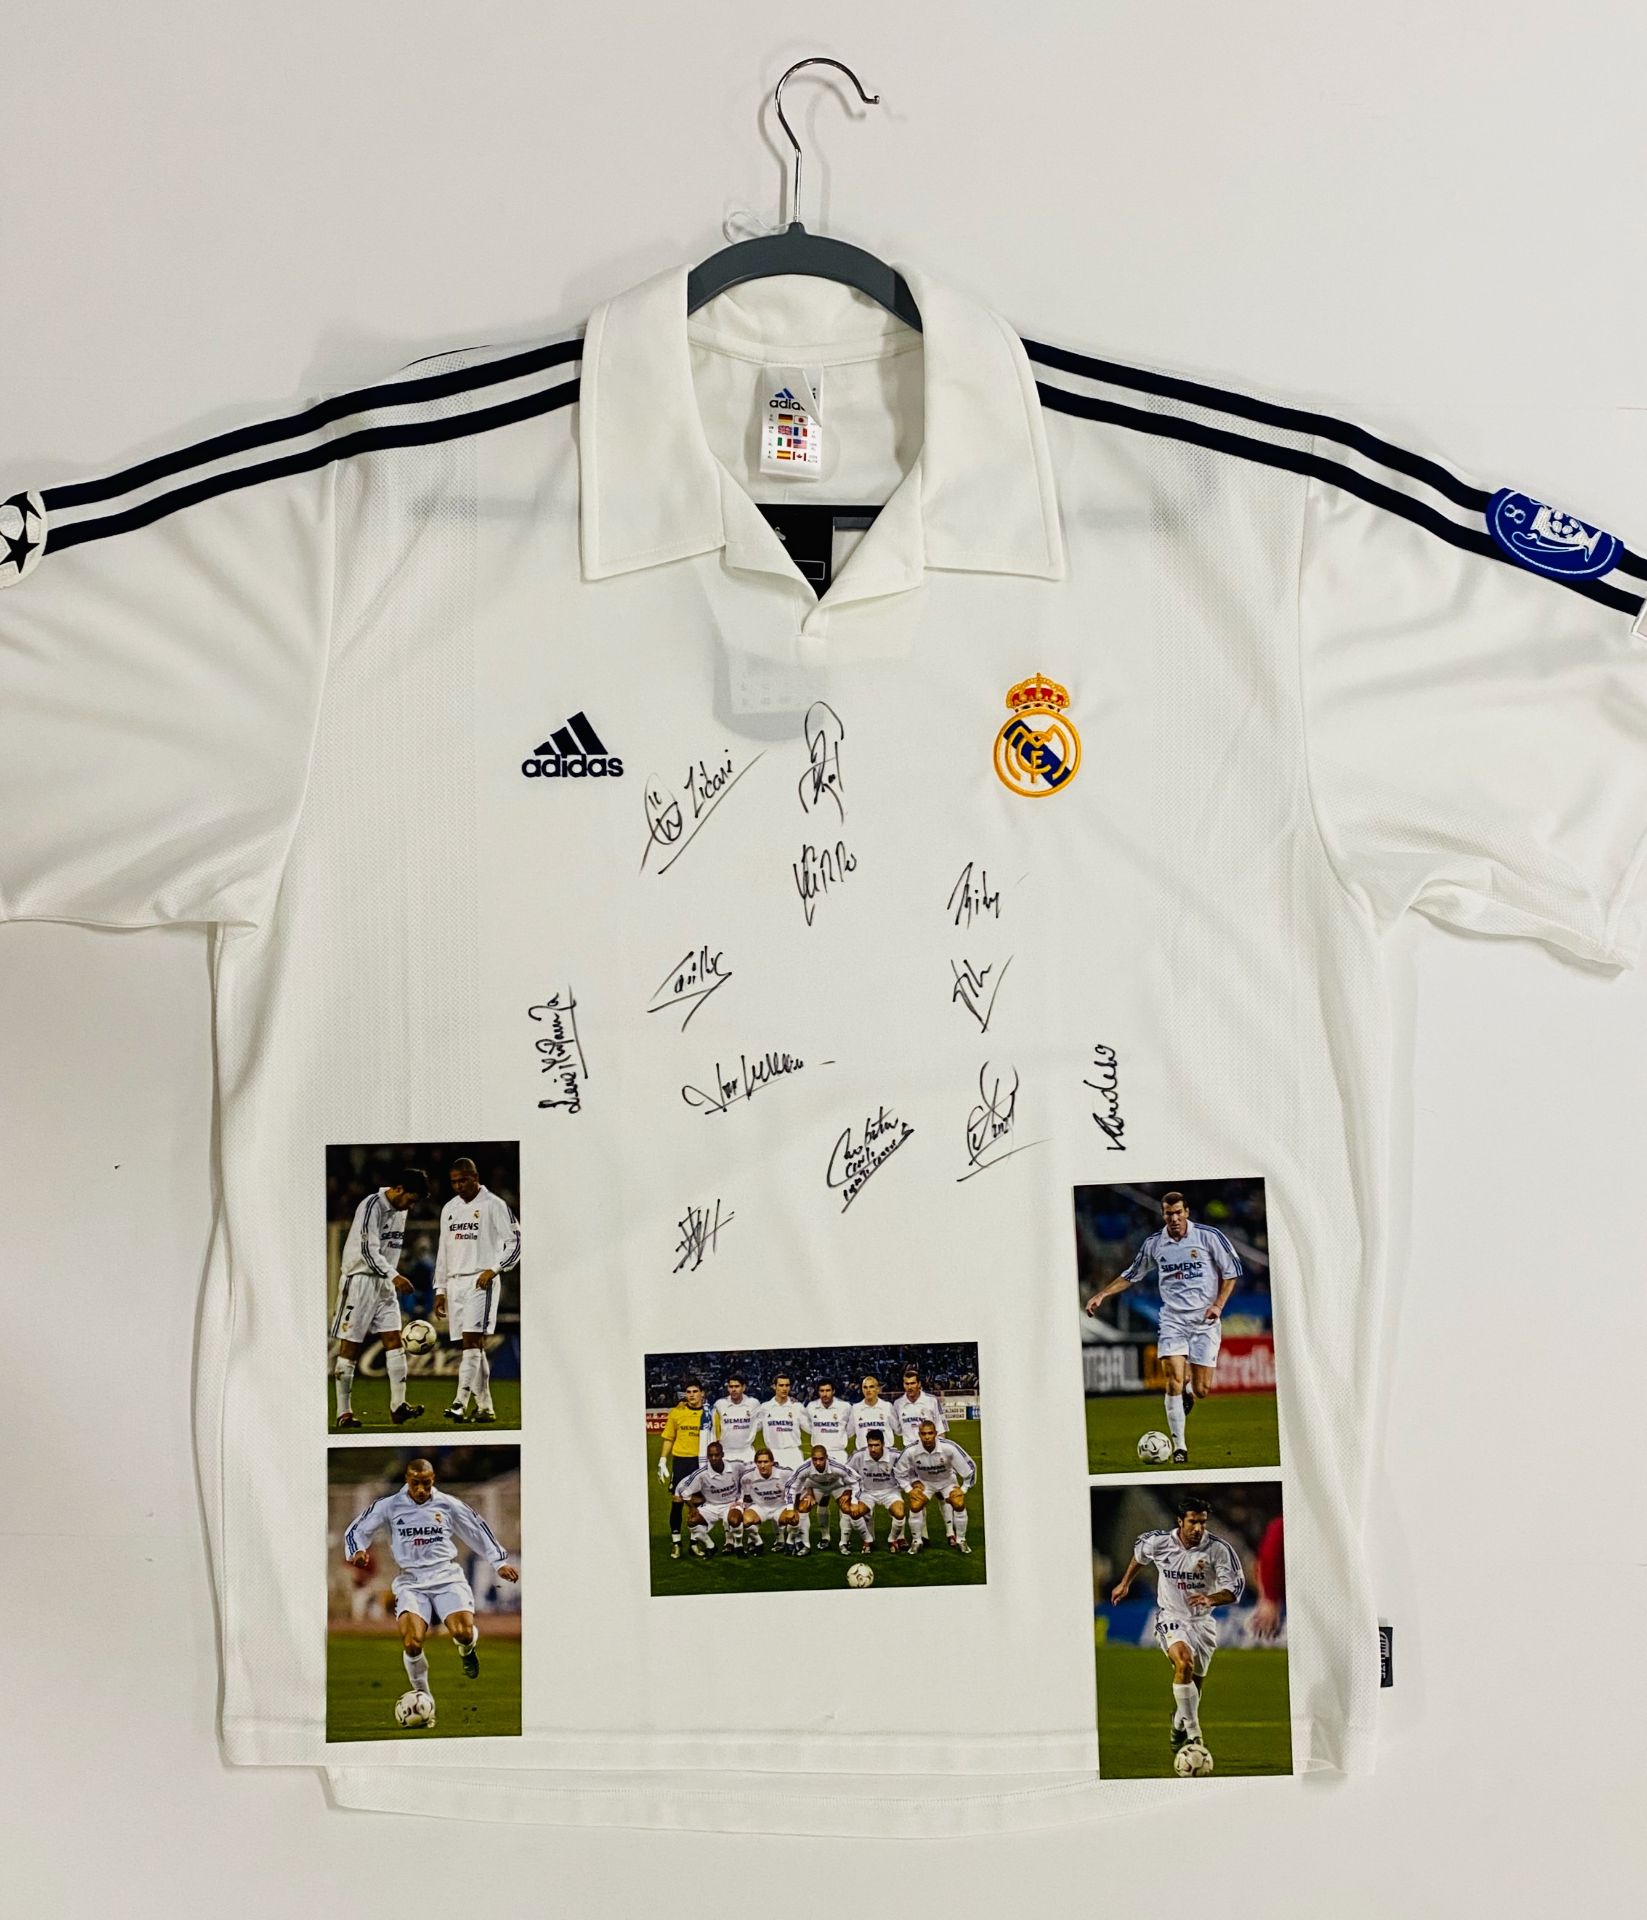 Real Madrid 2002/03 squad signed jersey (S248) - Image 2 of 2